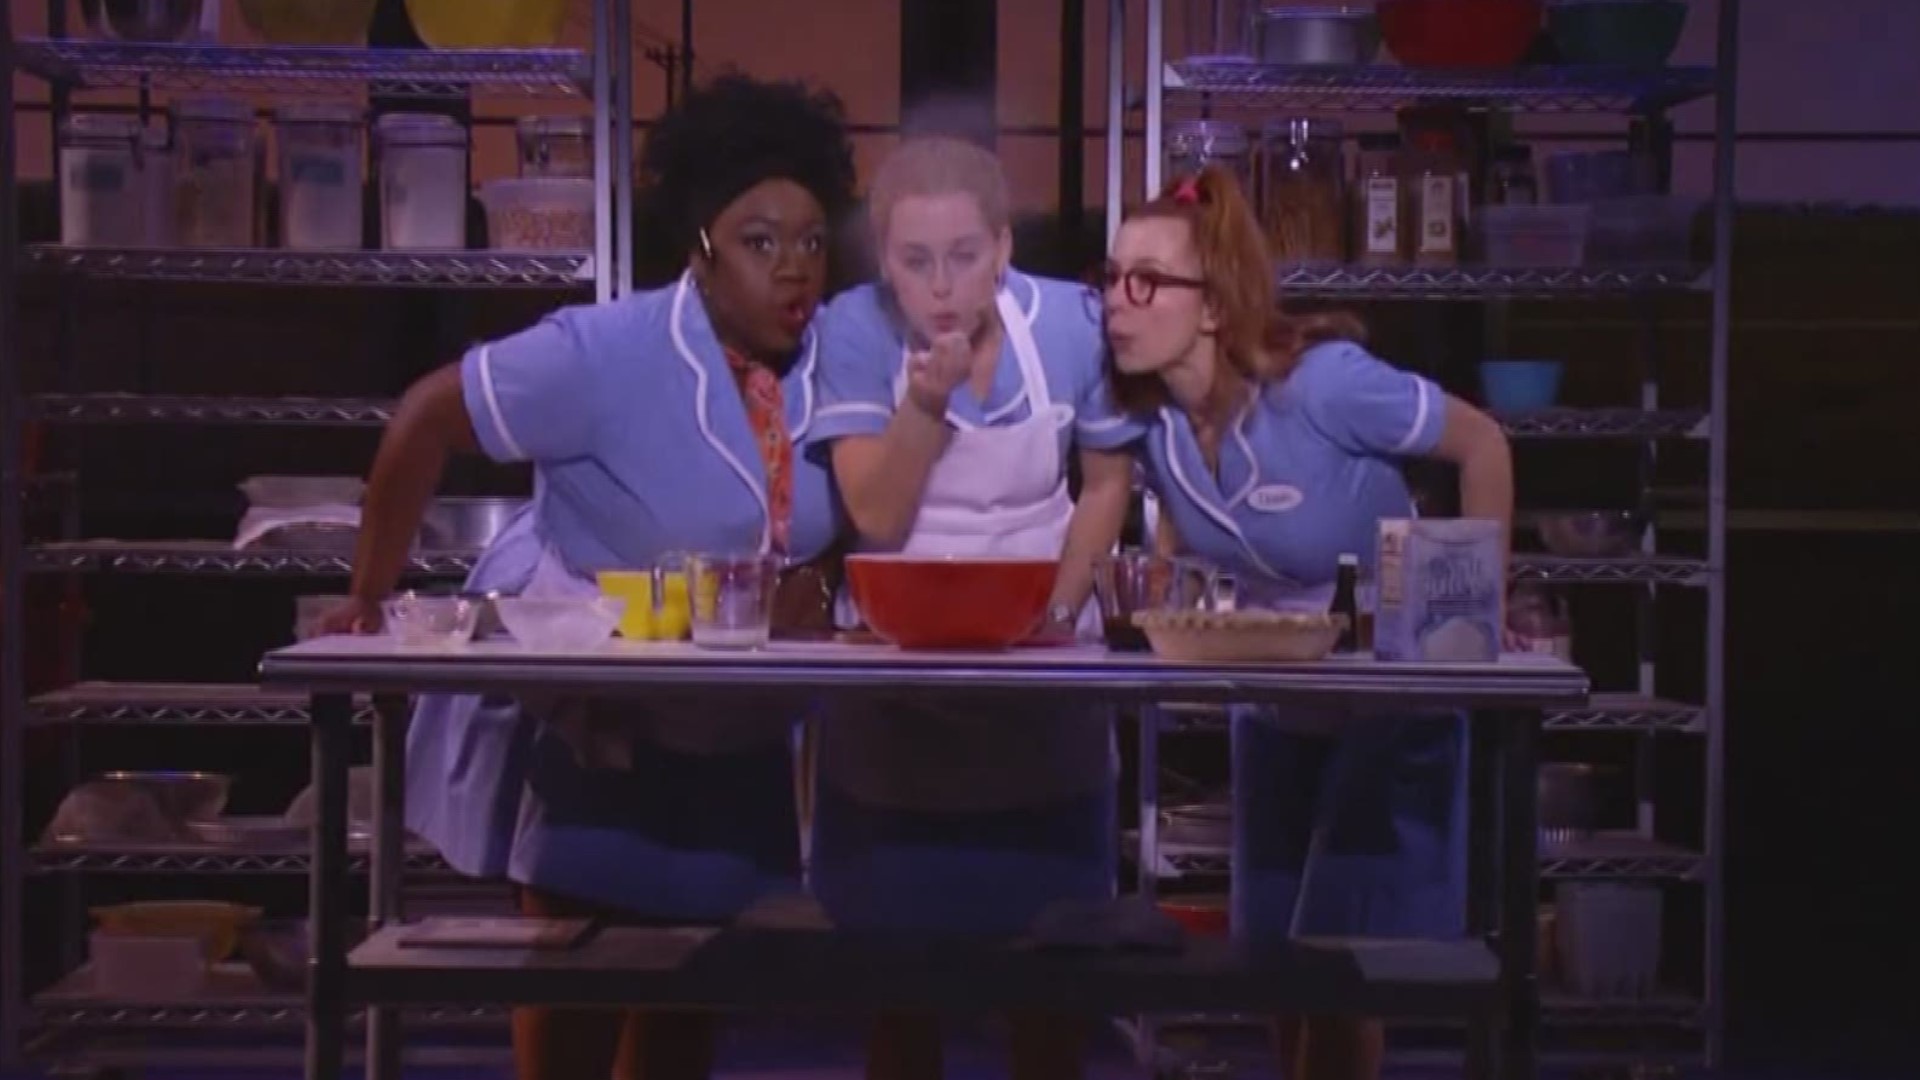 A big show is opening in Norfolk: 'Waitress.' It had a successful run on Broadway, now it's on tour and making a stop in our area.